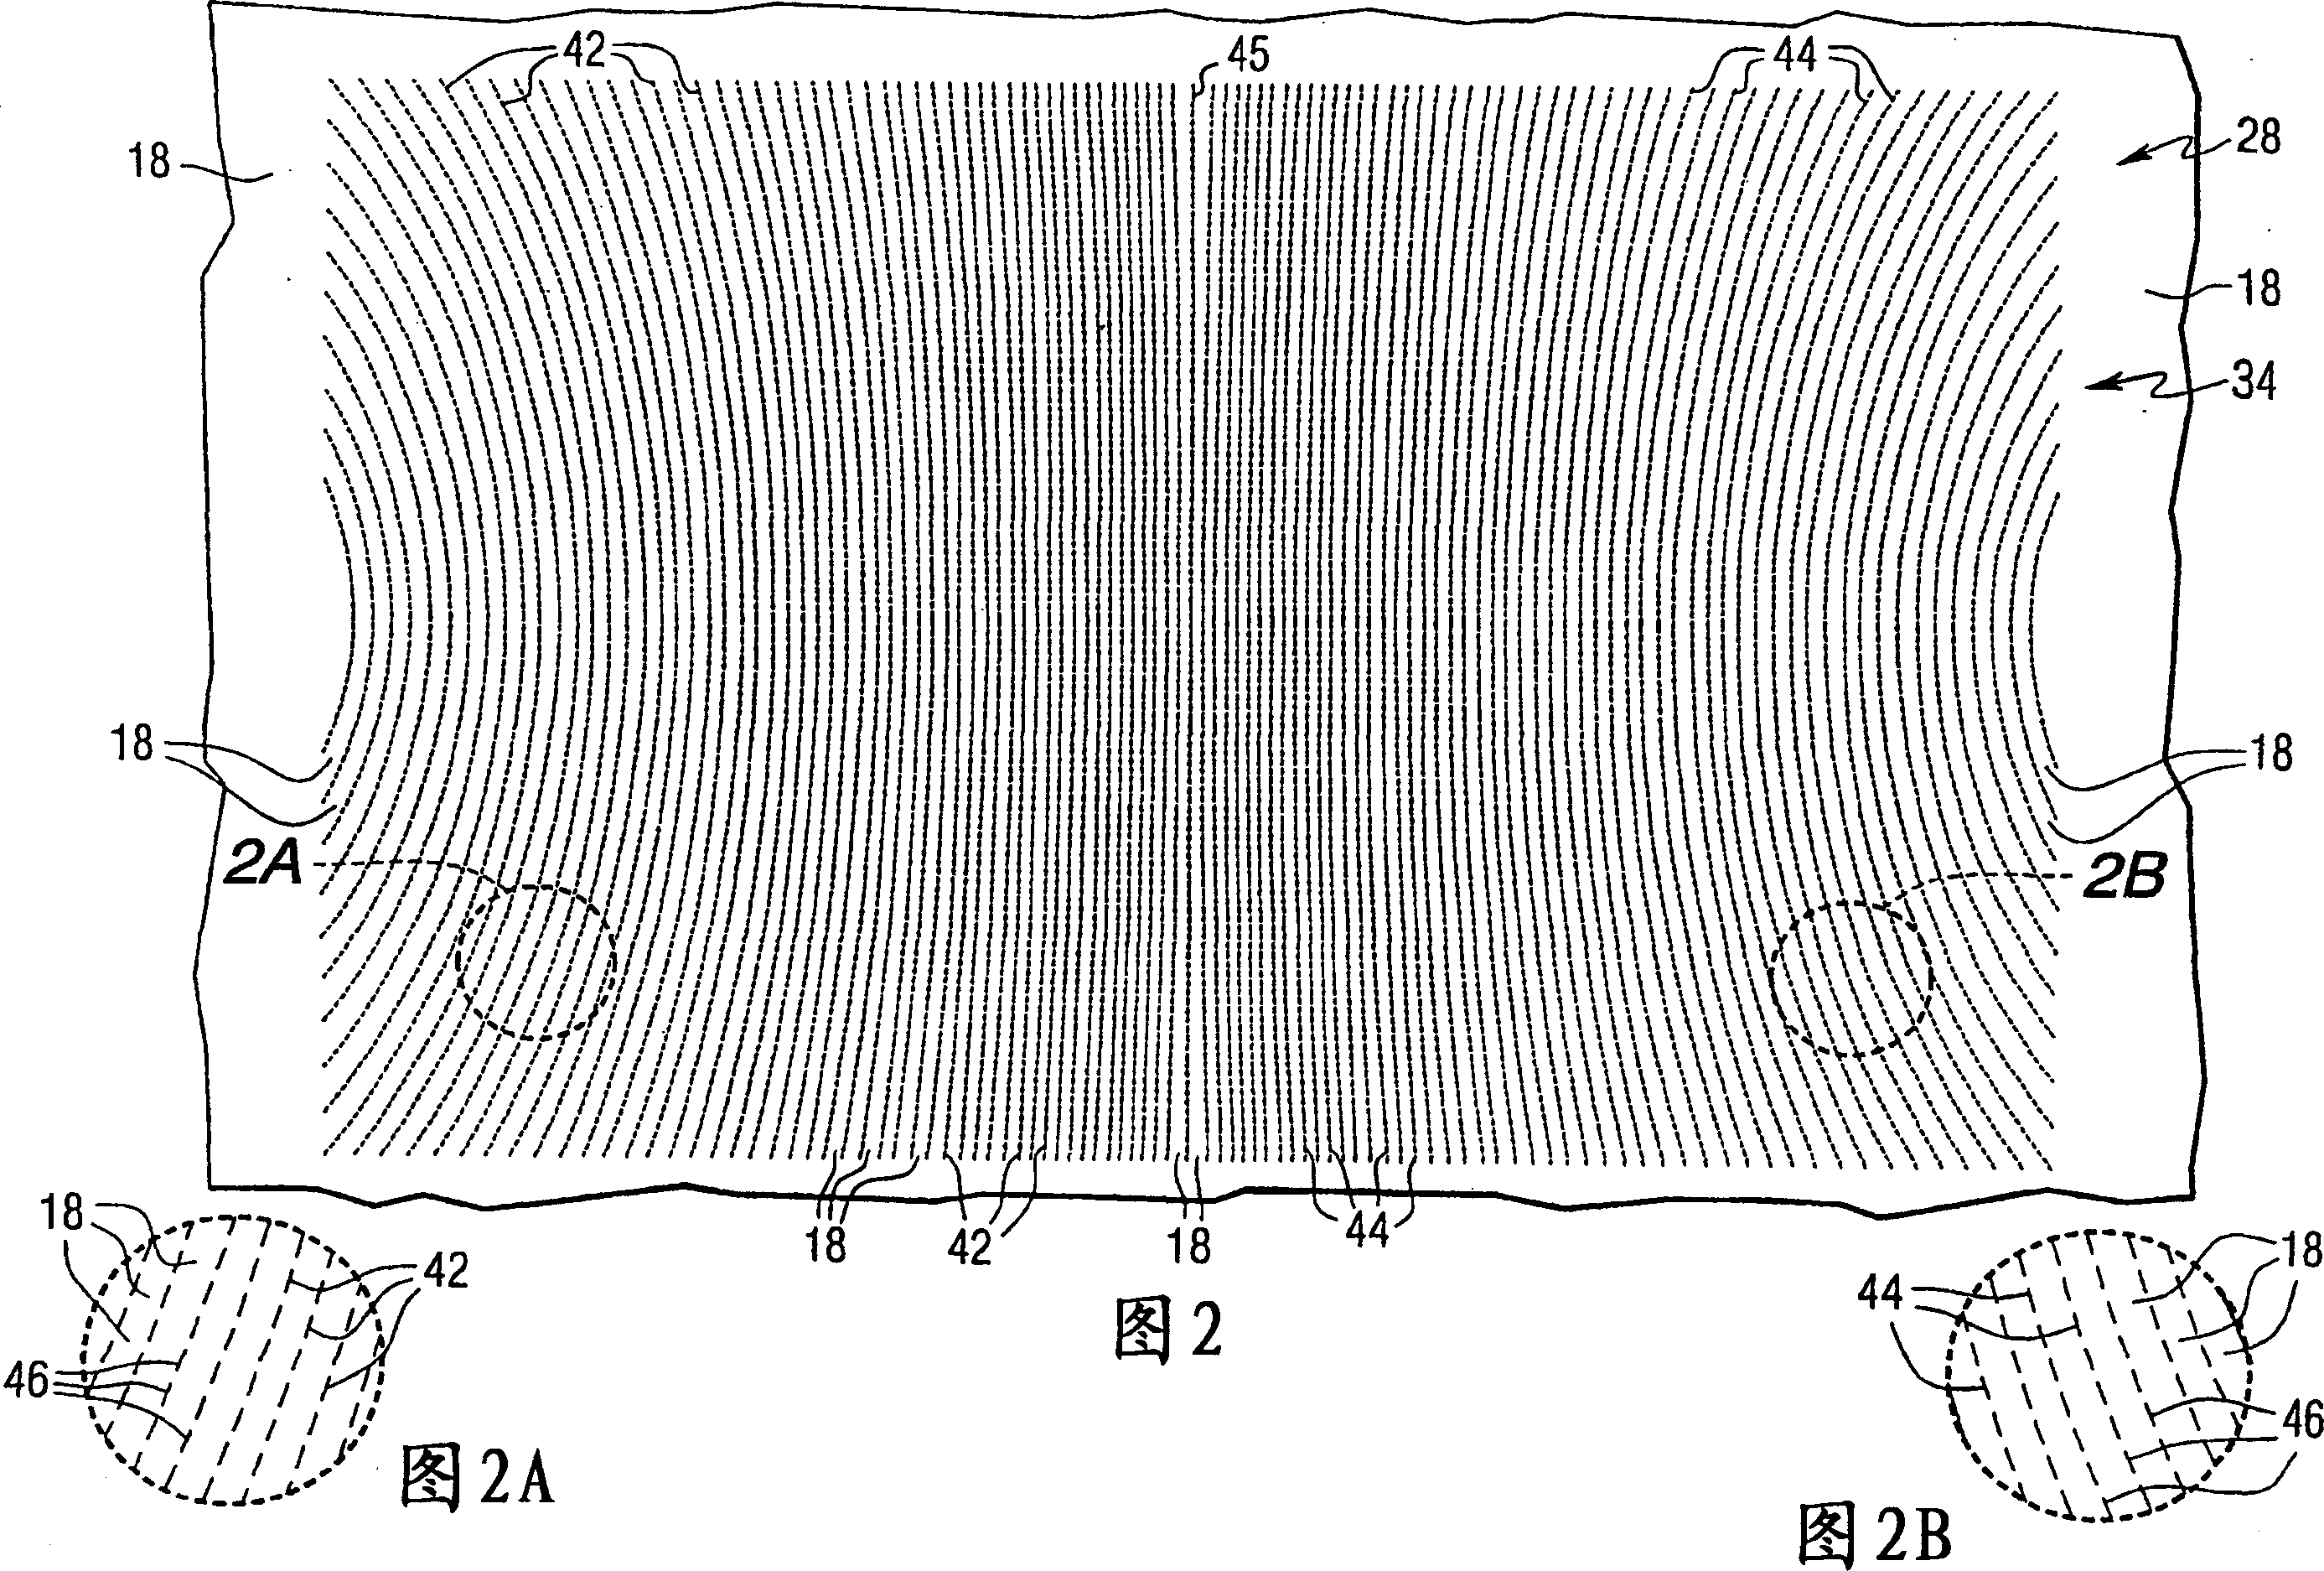 Conductive frequency selective surface utilizing arc and line elements